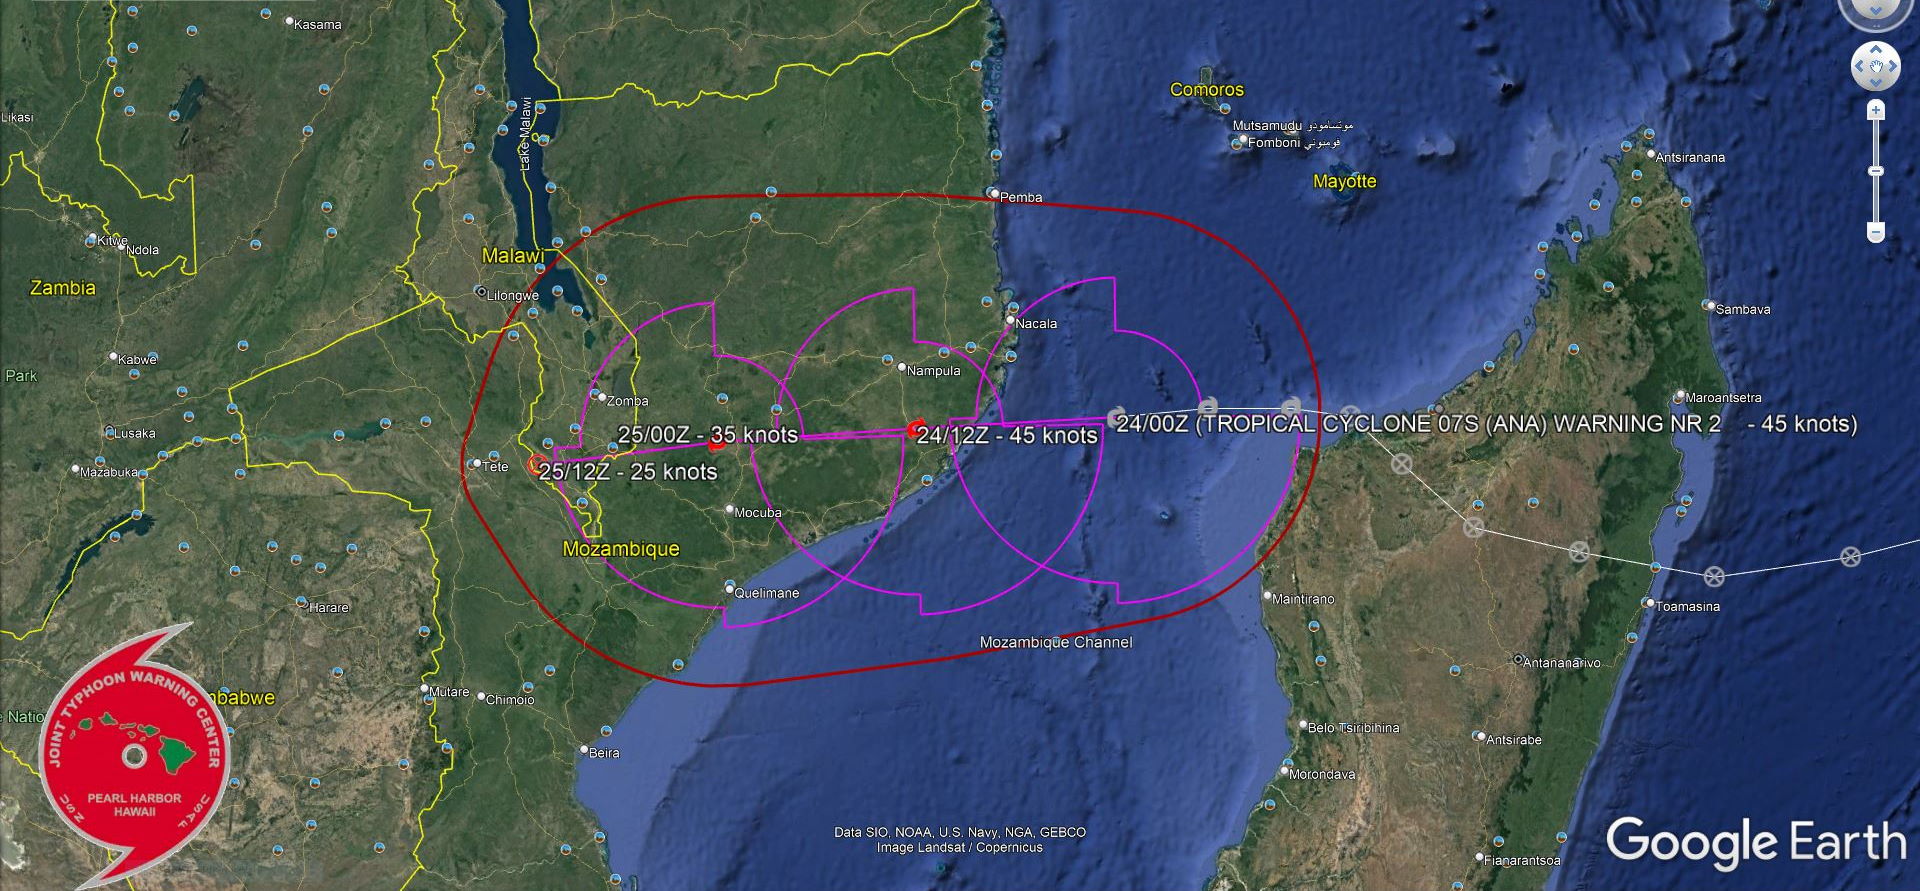 FORECAST REASONING.  SIGNIFICANT FORECAST CHANGES: THERE ARE NO SIGNIFICANT CHANGES TO THE FORECAST FROM THE PREVIOUS WARNING.  FORECAST DISCUSSION: TC 07S WILL CONTINUE TRACKING WESTWARD ALONG THE NORTHERN PERIPHERY OF THE SUBTROPICAL RIDGE (STR) THROUGH THE FORECAST PERIOD. THE SYSTEM IS EXPECTED TO MAKE LANDFALL ALONG THE MOZAMBIQUE COAST SOUTH OF NACALA WITHIN THE NEXT 12 HOURS. THE WARM SSTS, GOOD DIVERGENCE ALOFT, AND LOW VWS WILL SUPPORT NEAR-TERM INTENSIFICATION TO A PEAK NEAR 50-55 KNOTS PRIOR TO LANDFALL, WHICH CANNOT BE CAPTURED IN THE 12-HOUR FORECAST INCREMENTS. THE SYSTEM WILL RAPIDLY WEAKEN AND DISSIPATE BELOW WARNING CRITERIA WITHIN 24 HOURS OF LANDFALL.